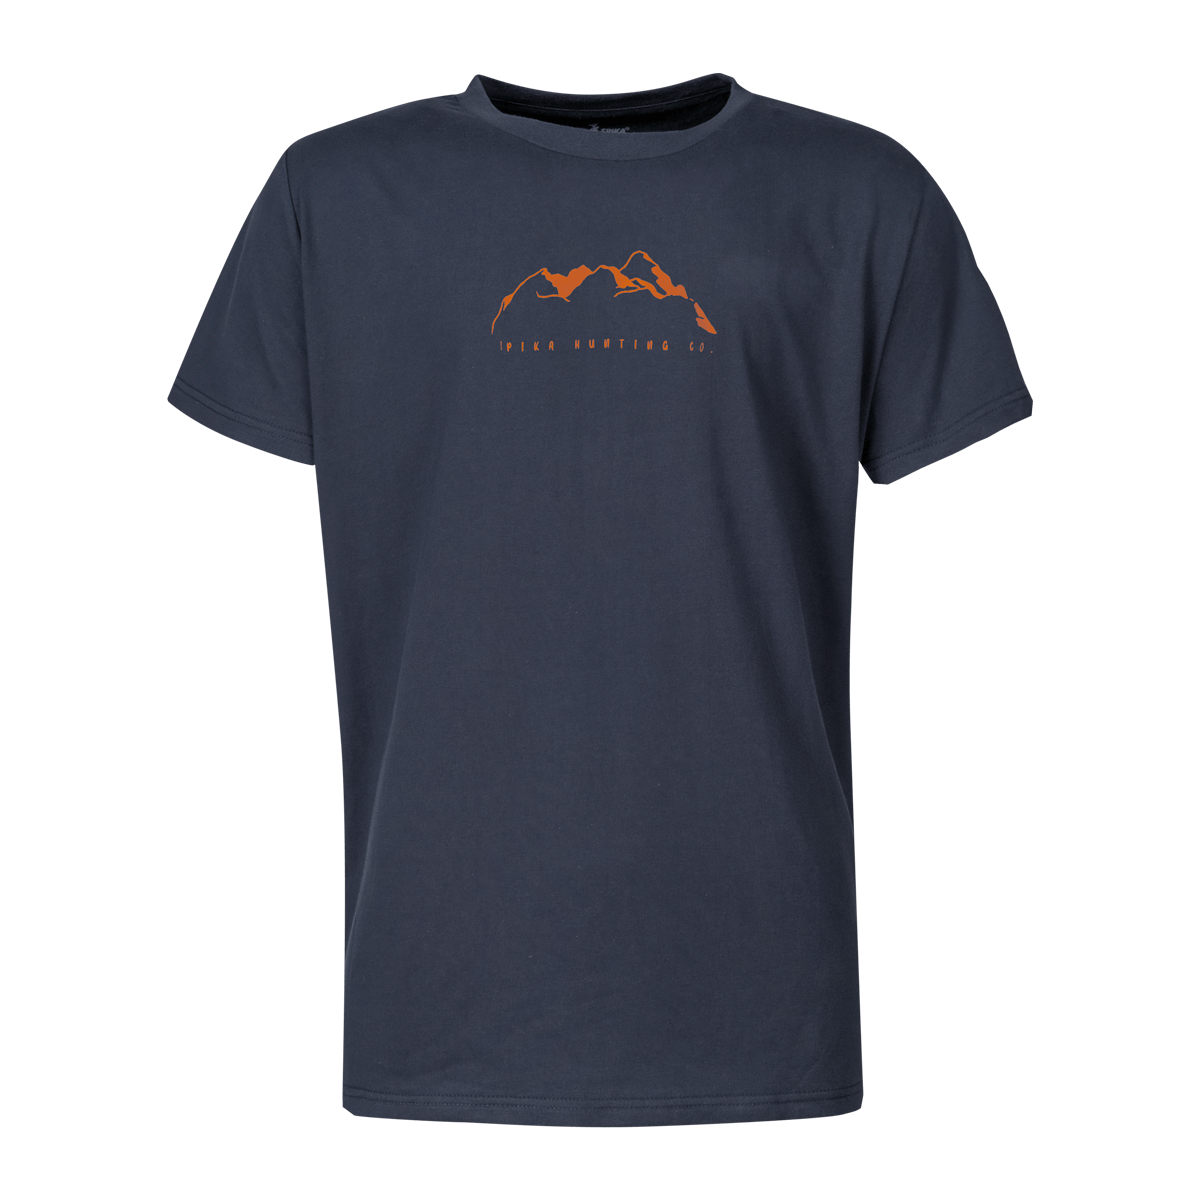 Spika Go Mountain T-Shirt - Navy - S / NAVY - Mansfield Hunting & Fishing - Products to prepare for Corona Virus